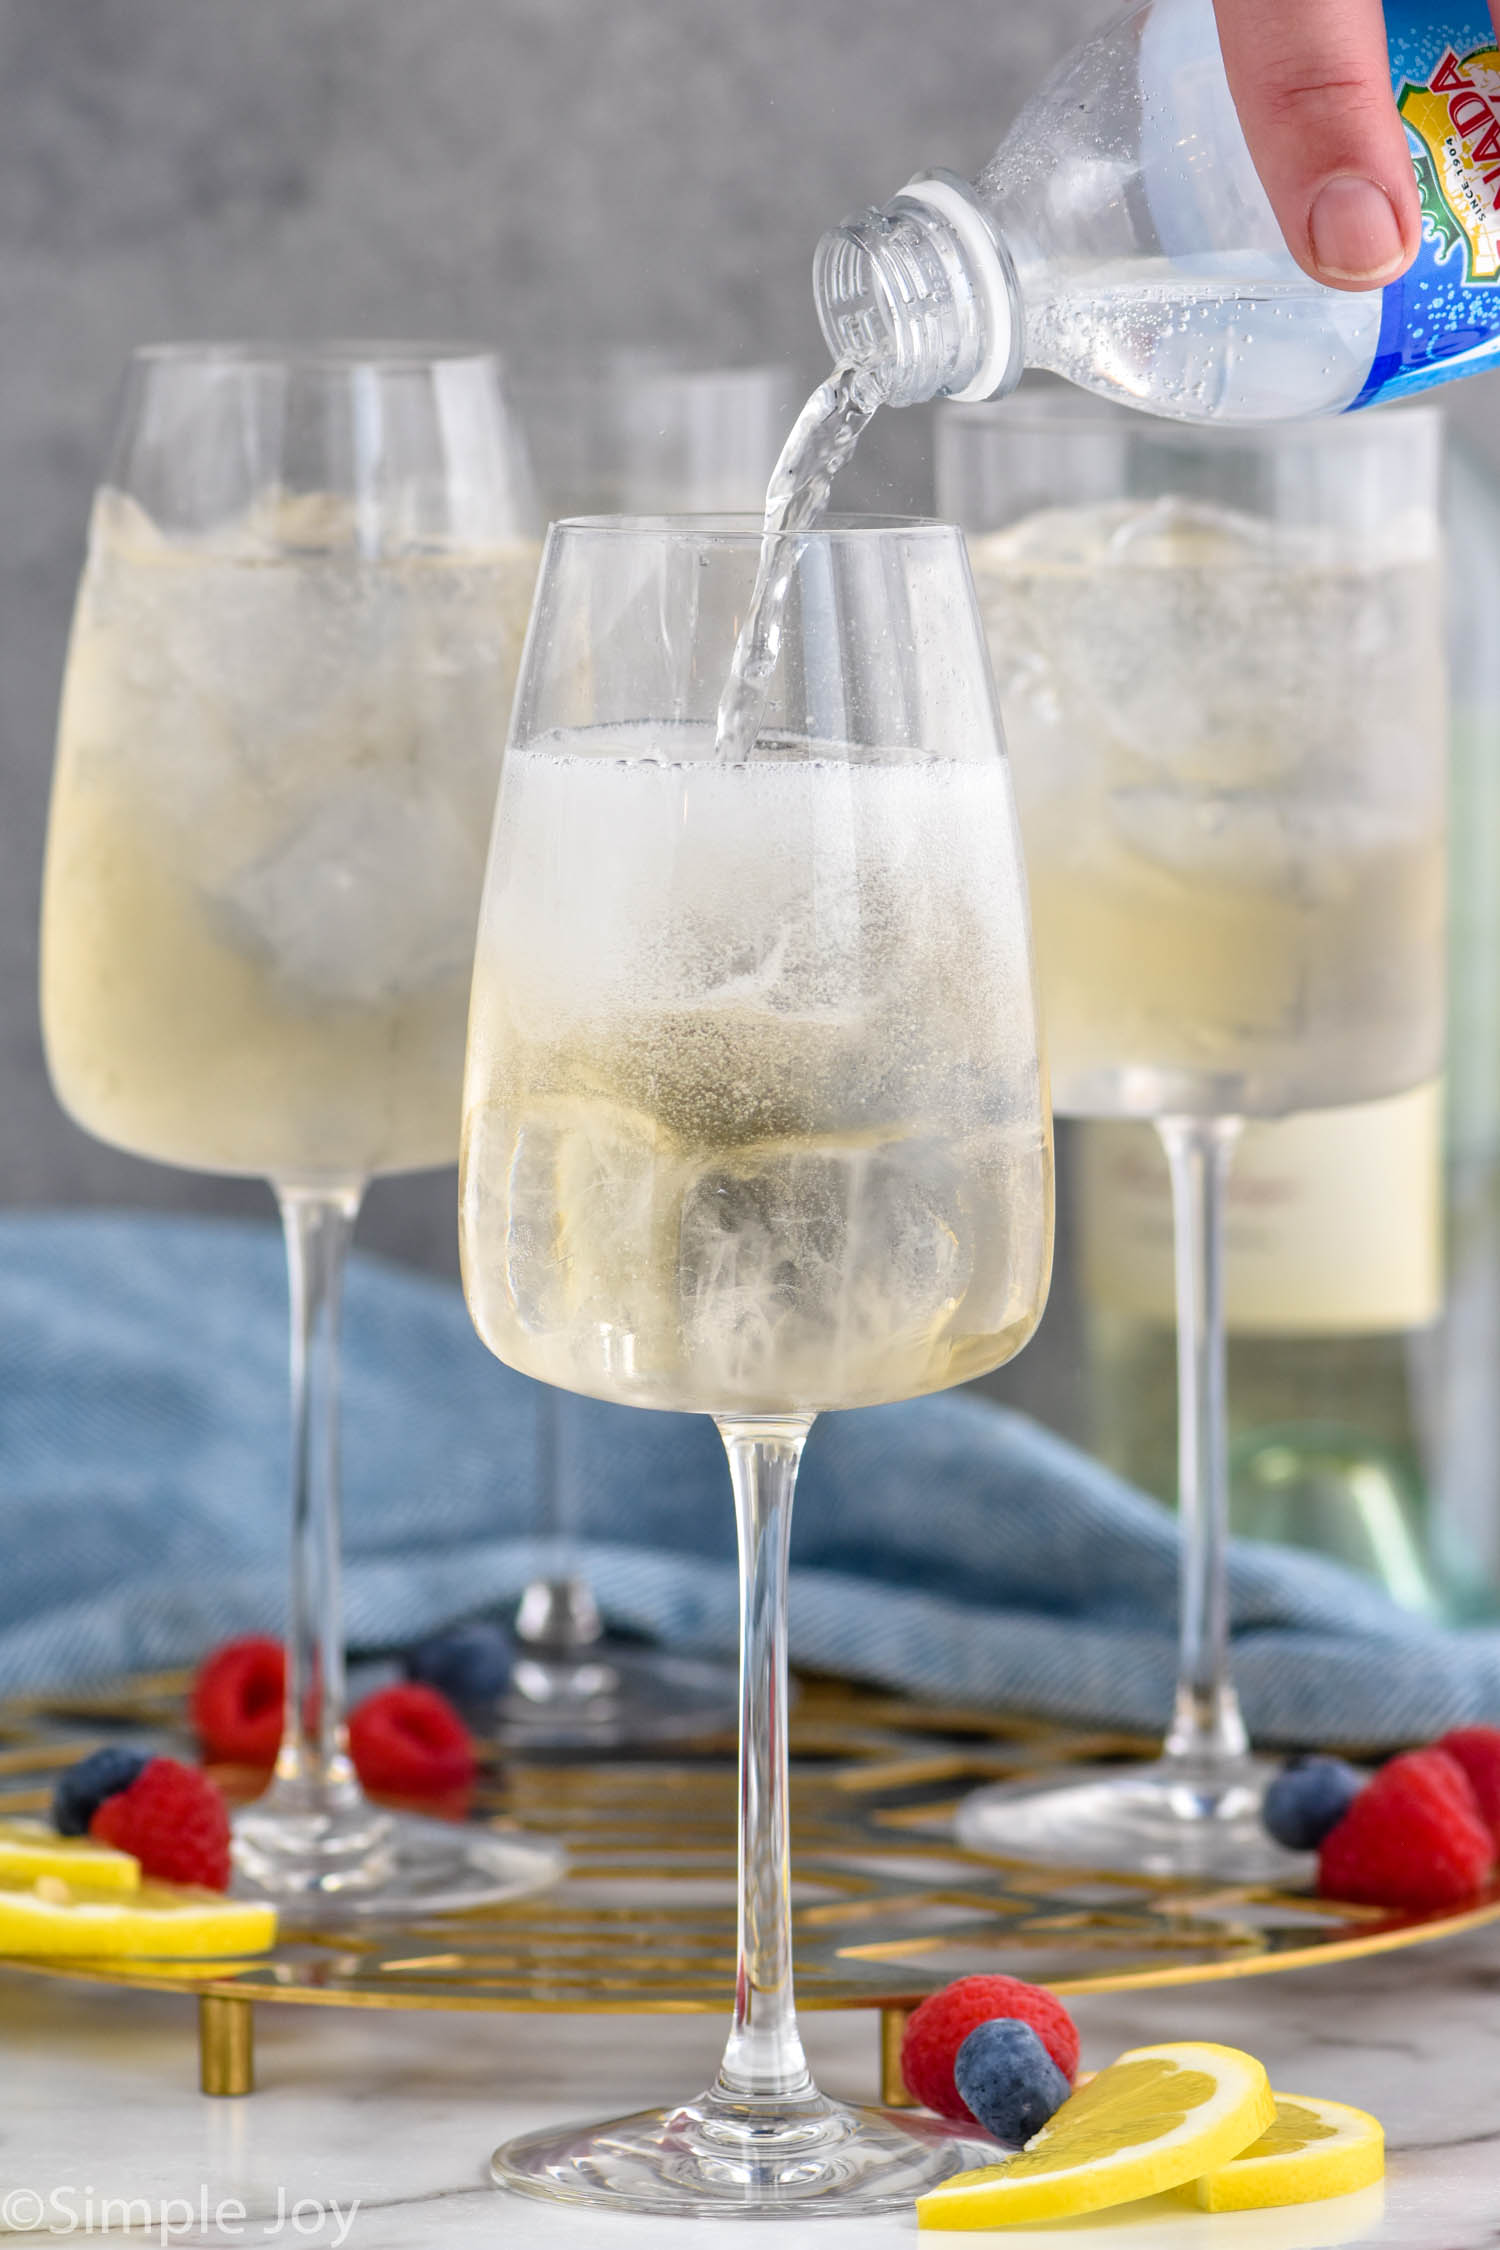 Photo of person's hand pouring club soda into a glass of ingredients for White Wine Spritzers. Lemon wedges and berries on counter for garnish.